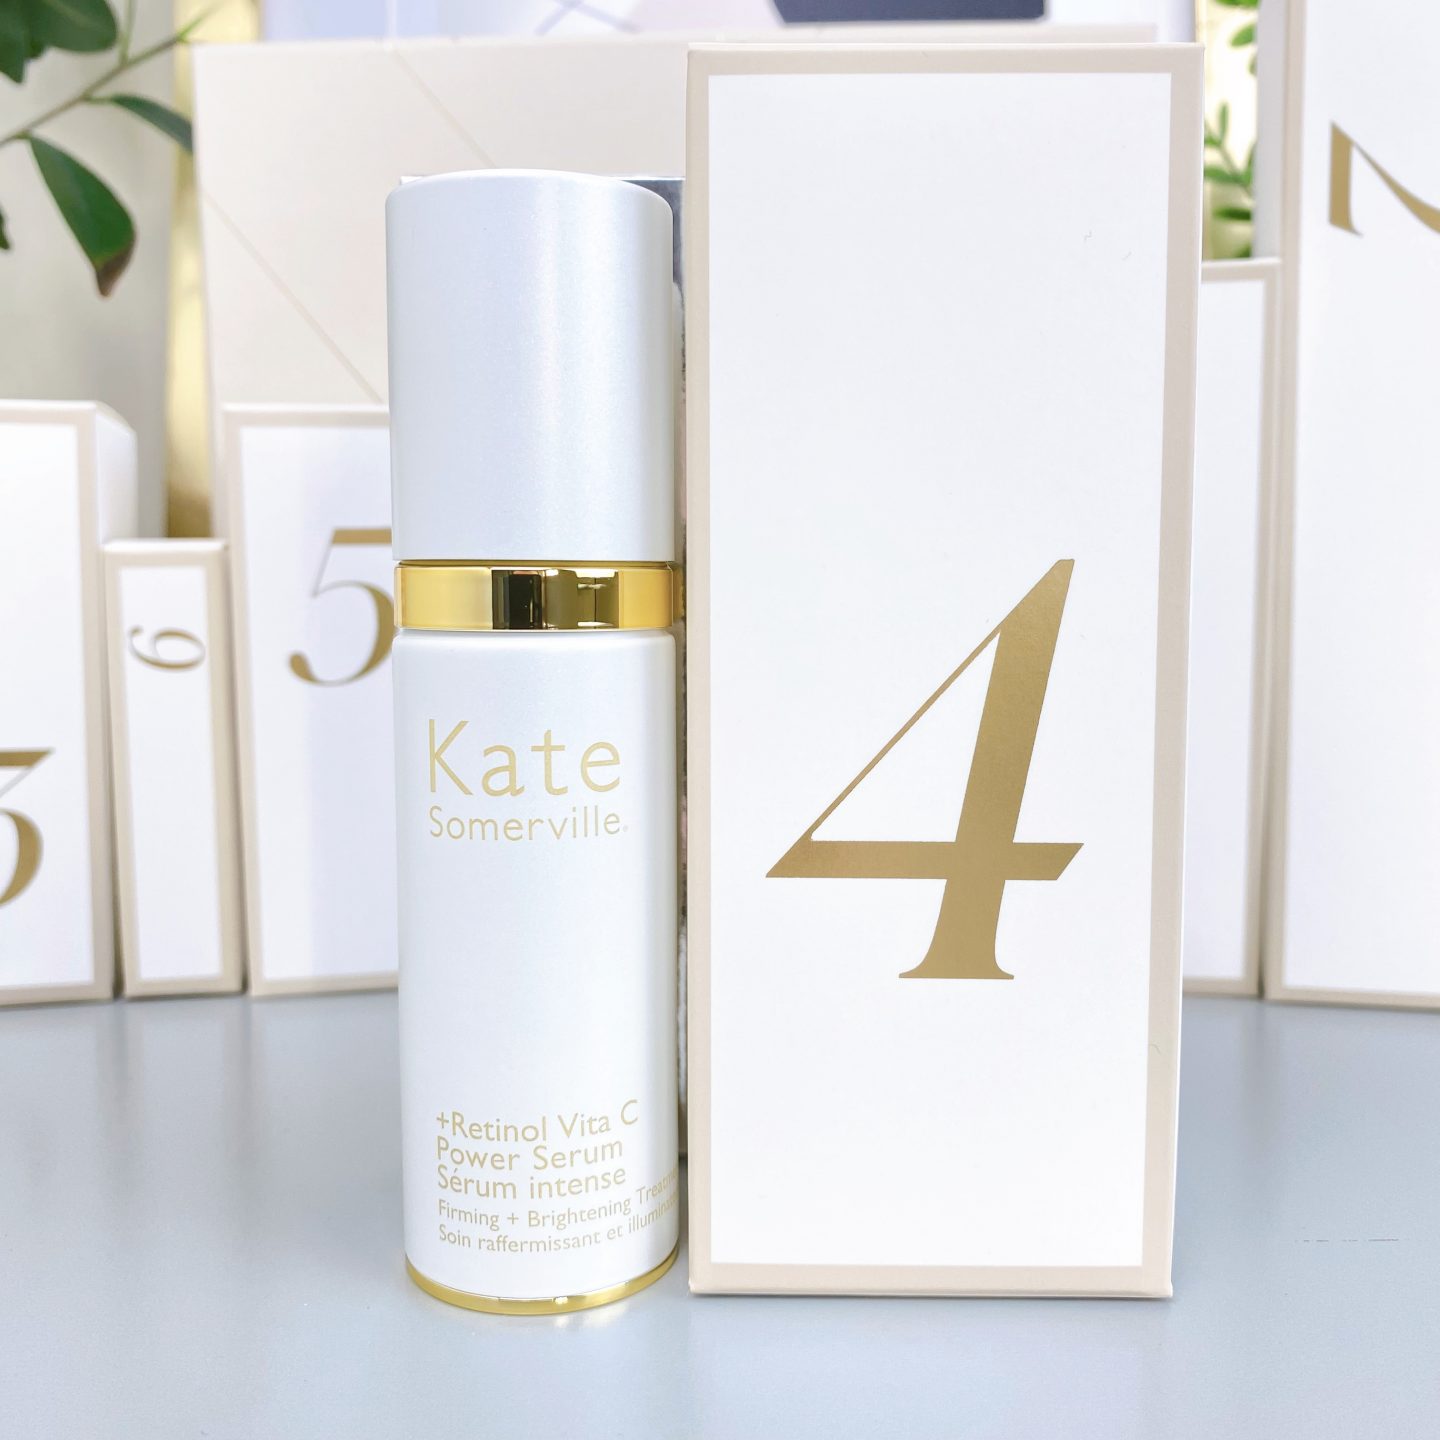 Kate Somerville 12 Days of Kate Advent Calendar Review